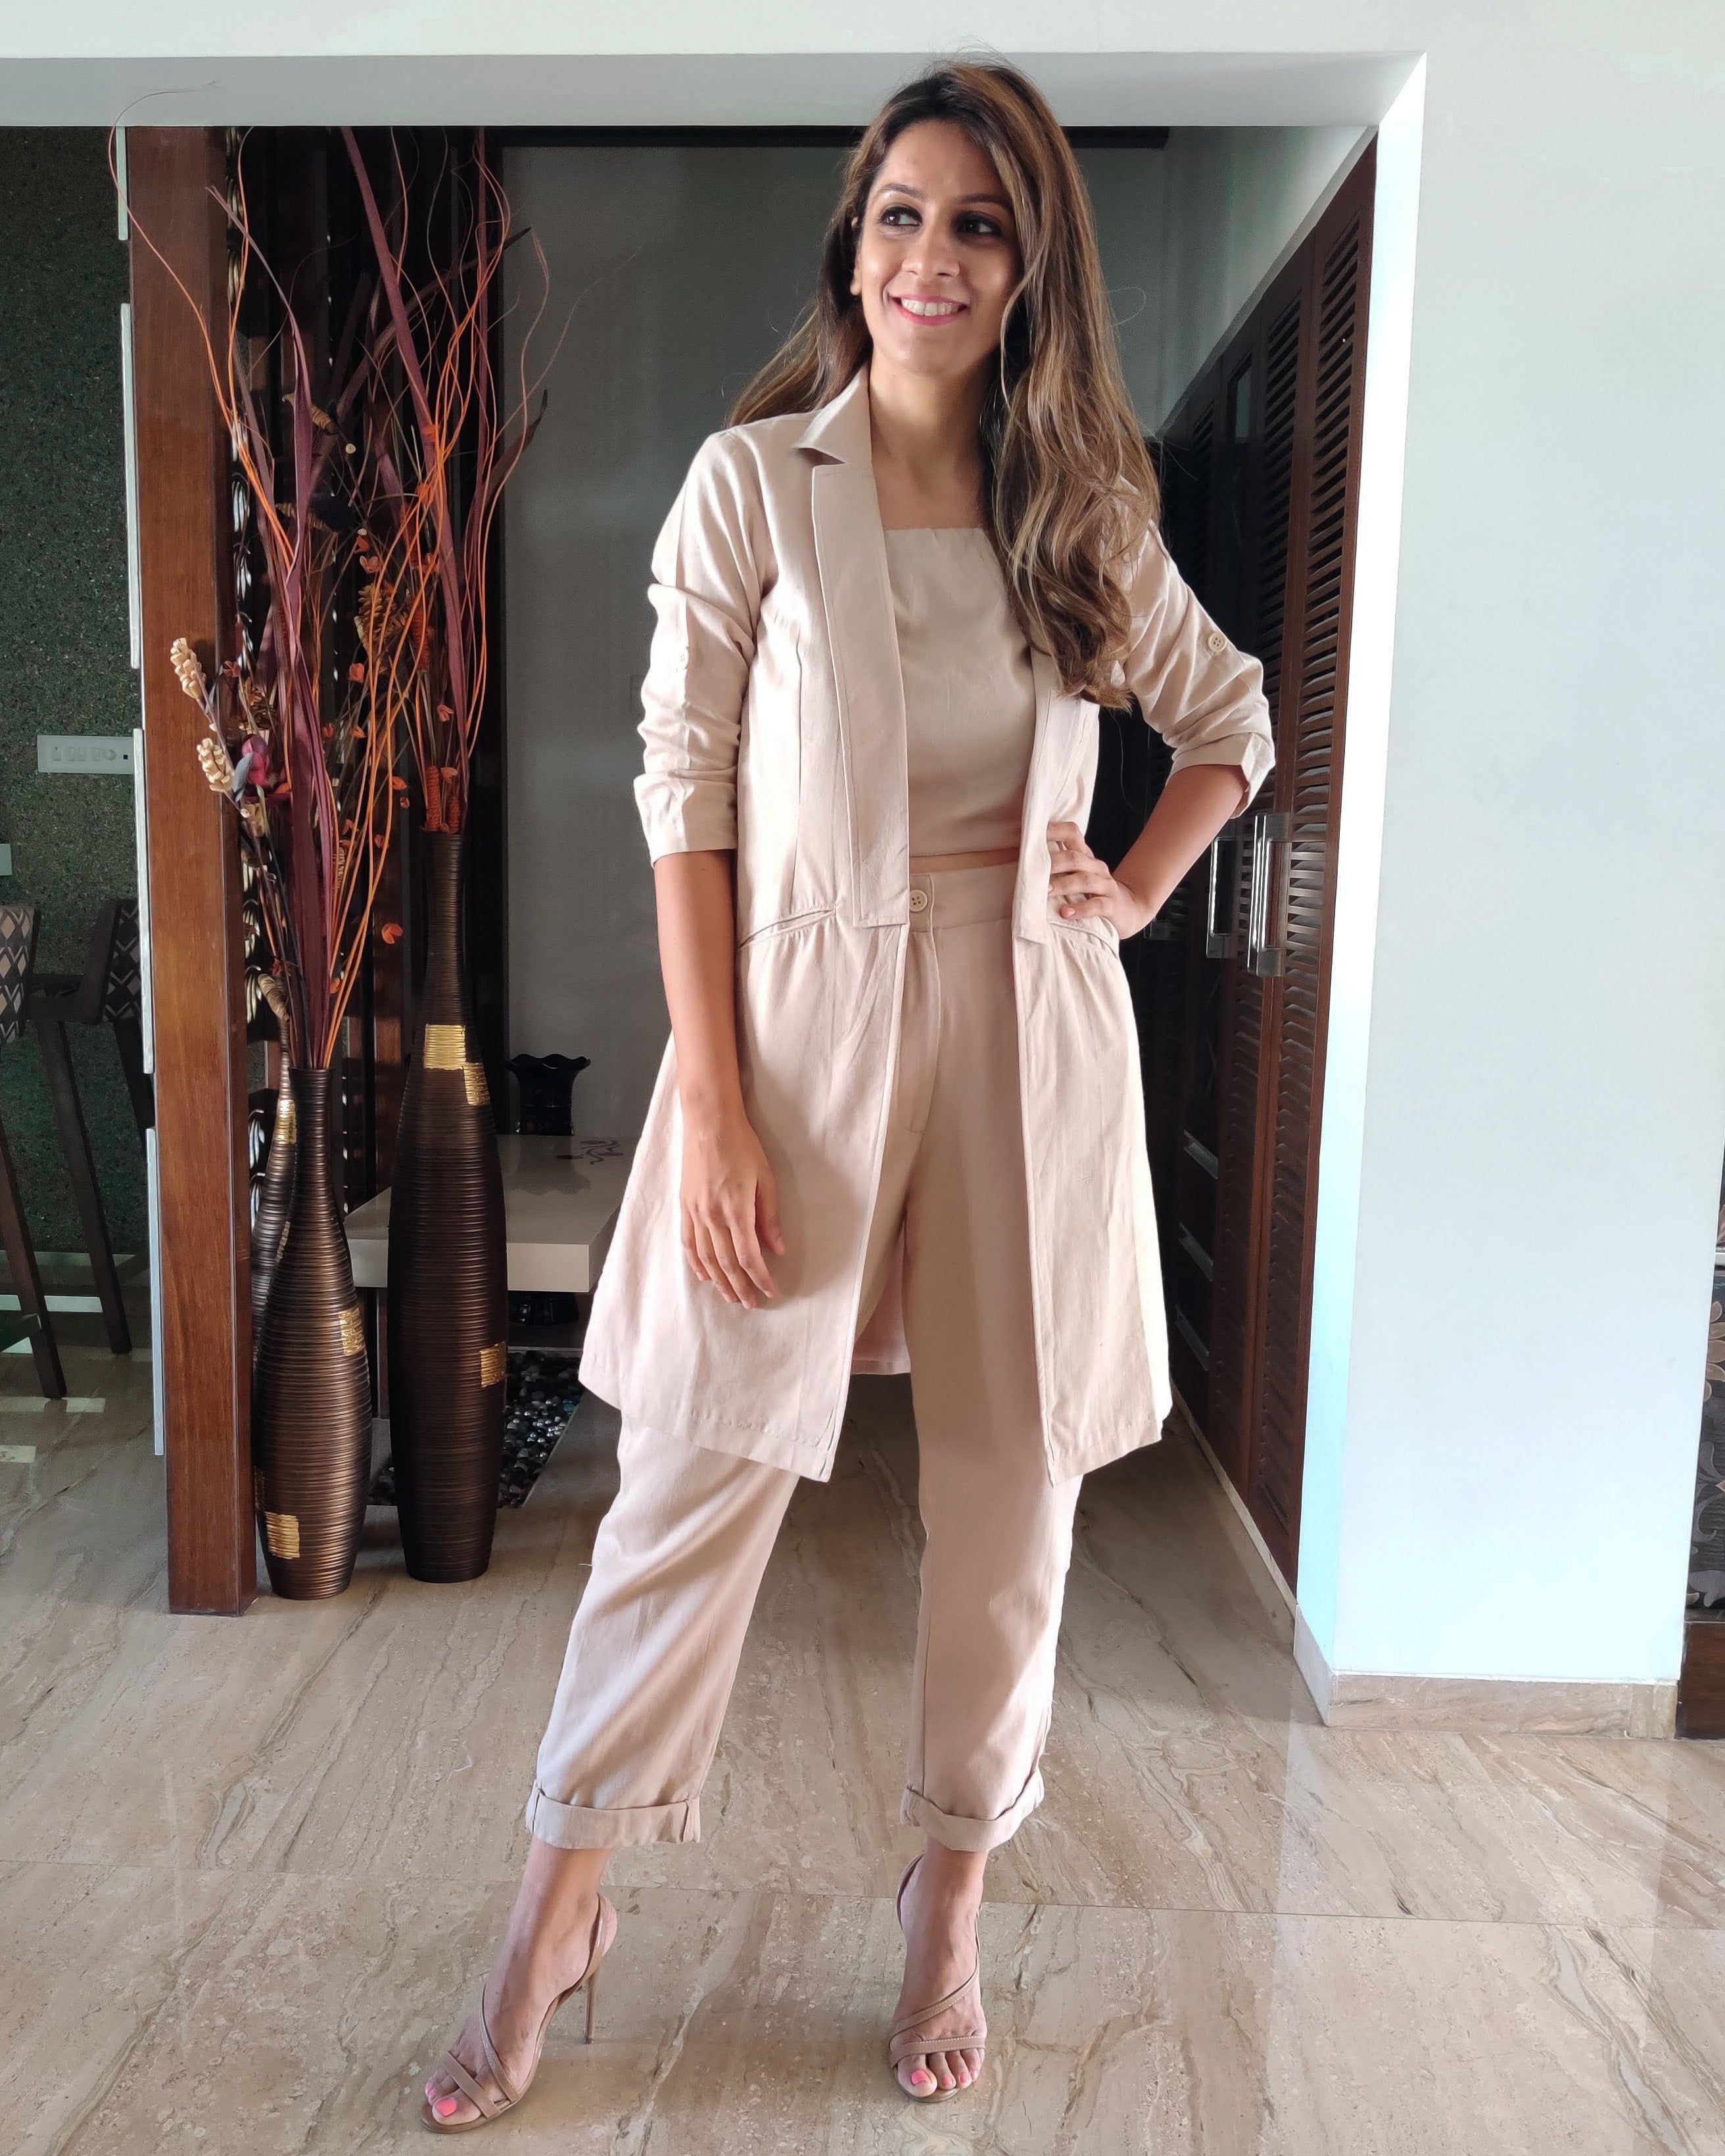 BEIGE LONG JACKET CO ORD WITH TUBE BUSTIER & PANTS